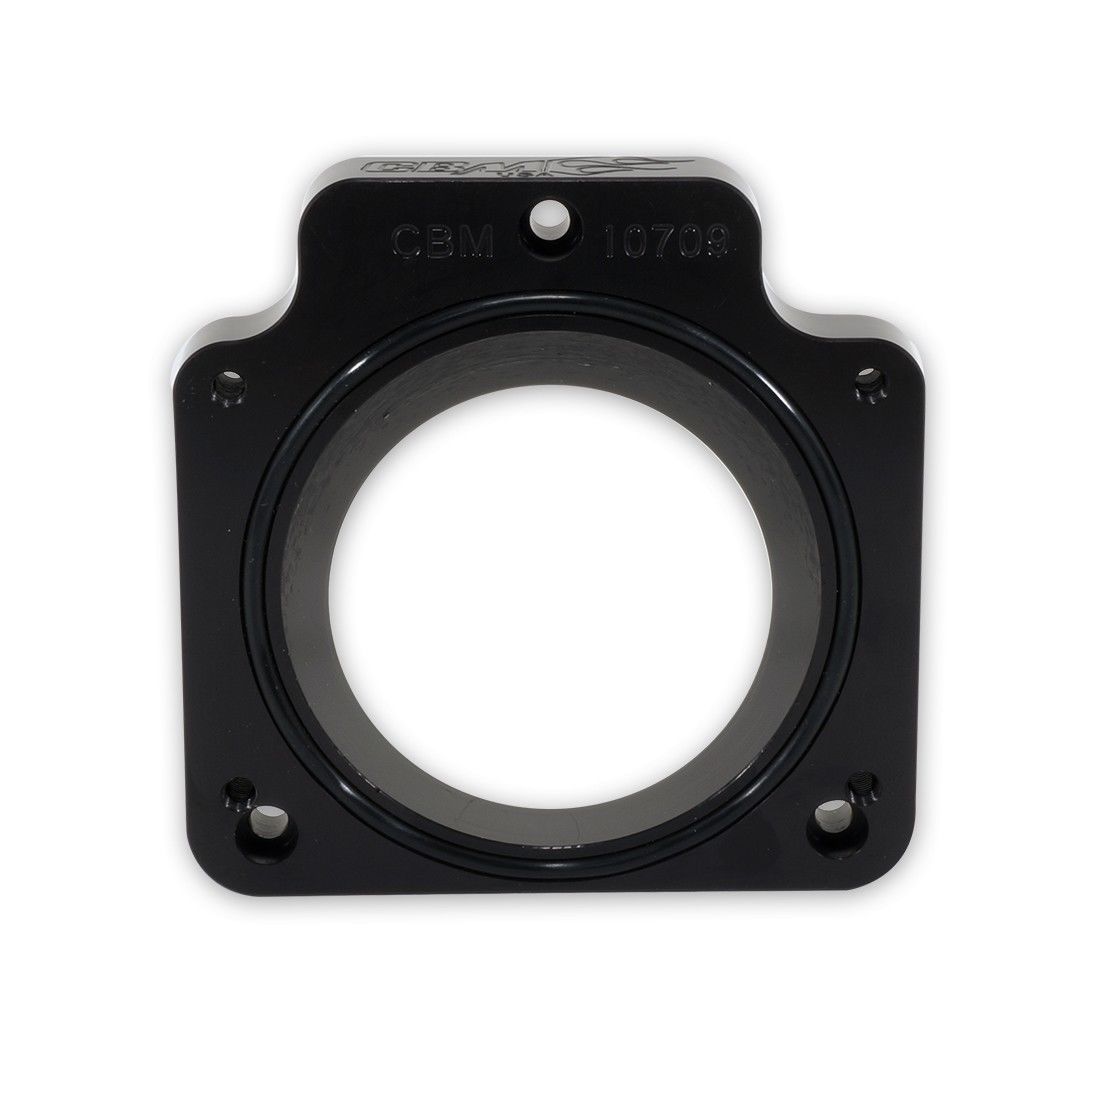 LS2 Throttle Body to LS1 Intake Manifold Billet Adapter Plate, Black Finish, Corvette and others